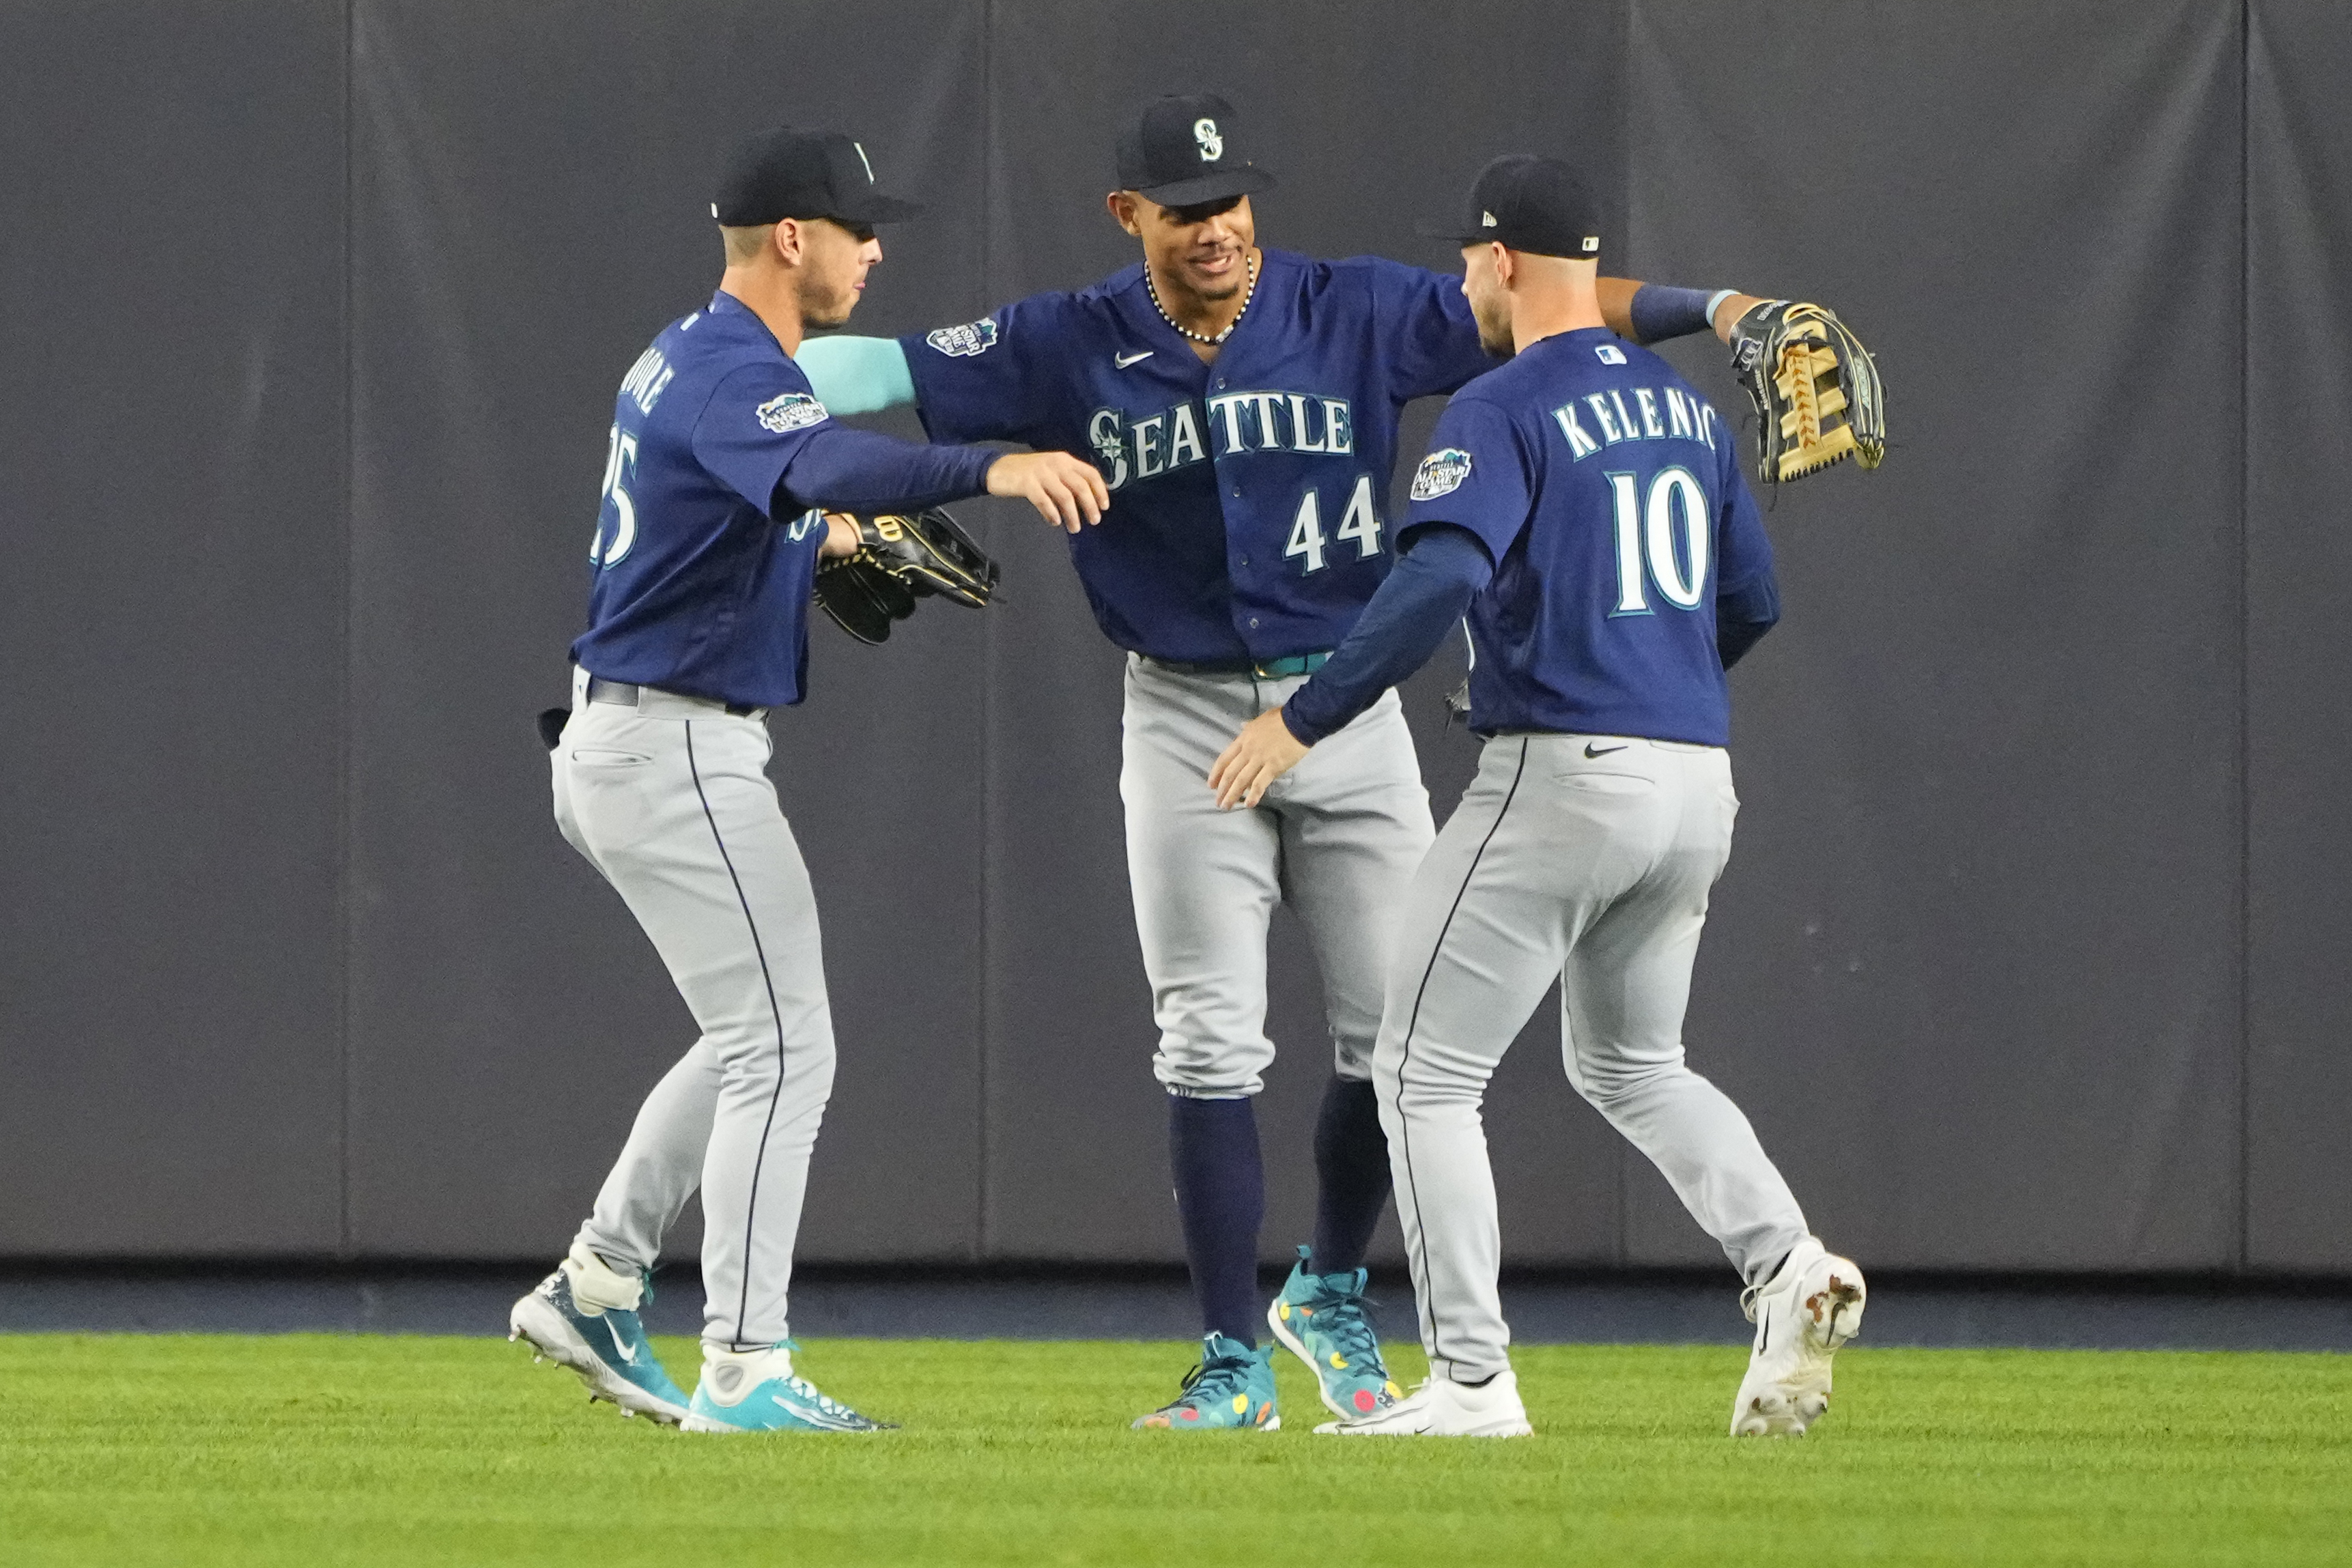 How to Watch the Mariners vs. Reds Game: Streaming & TV Info